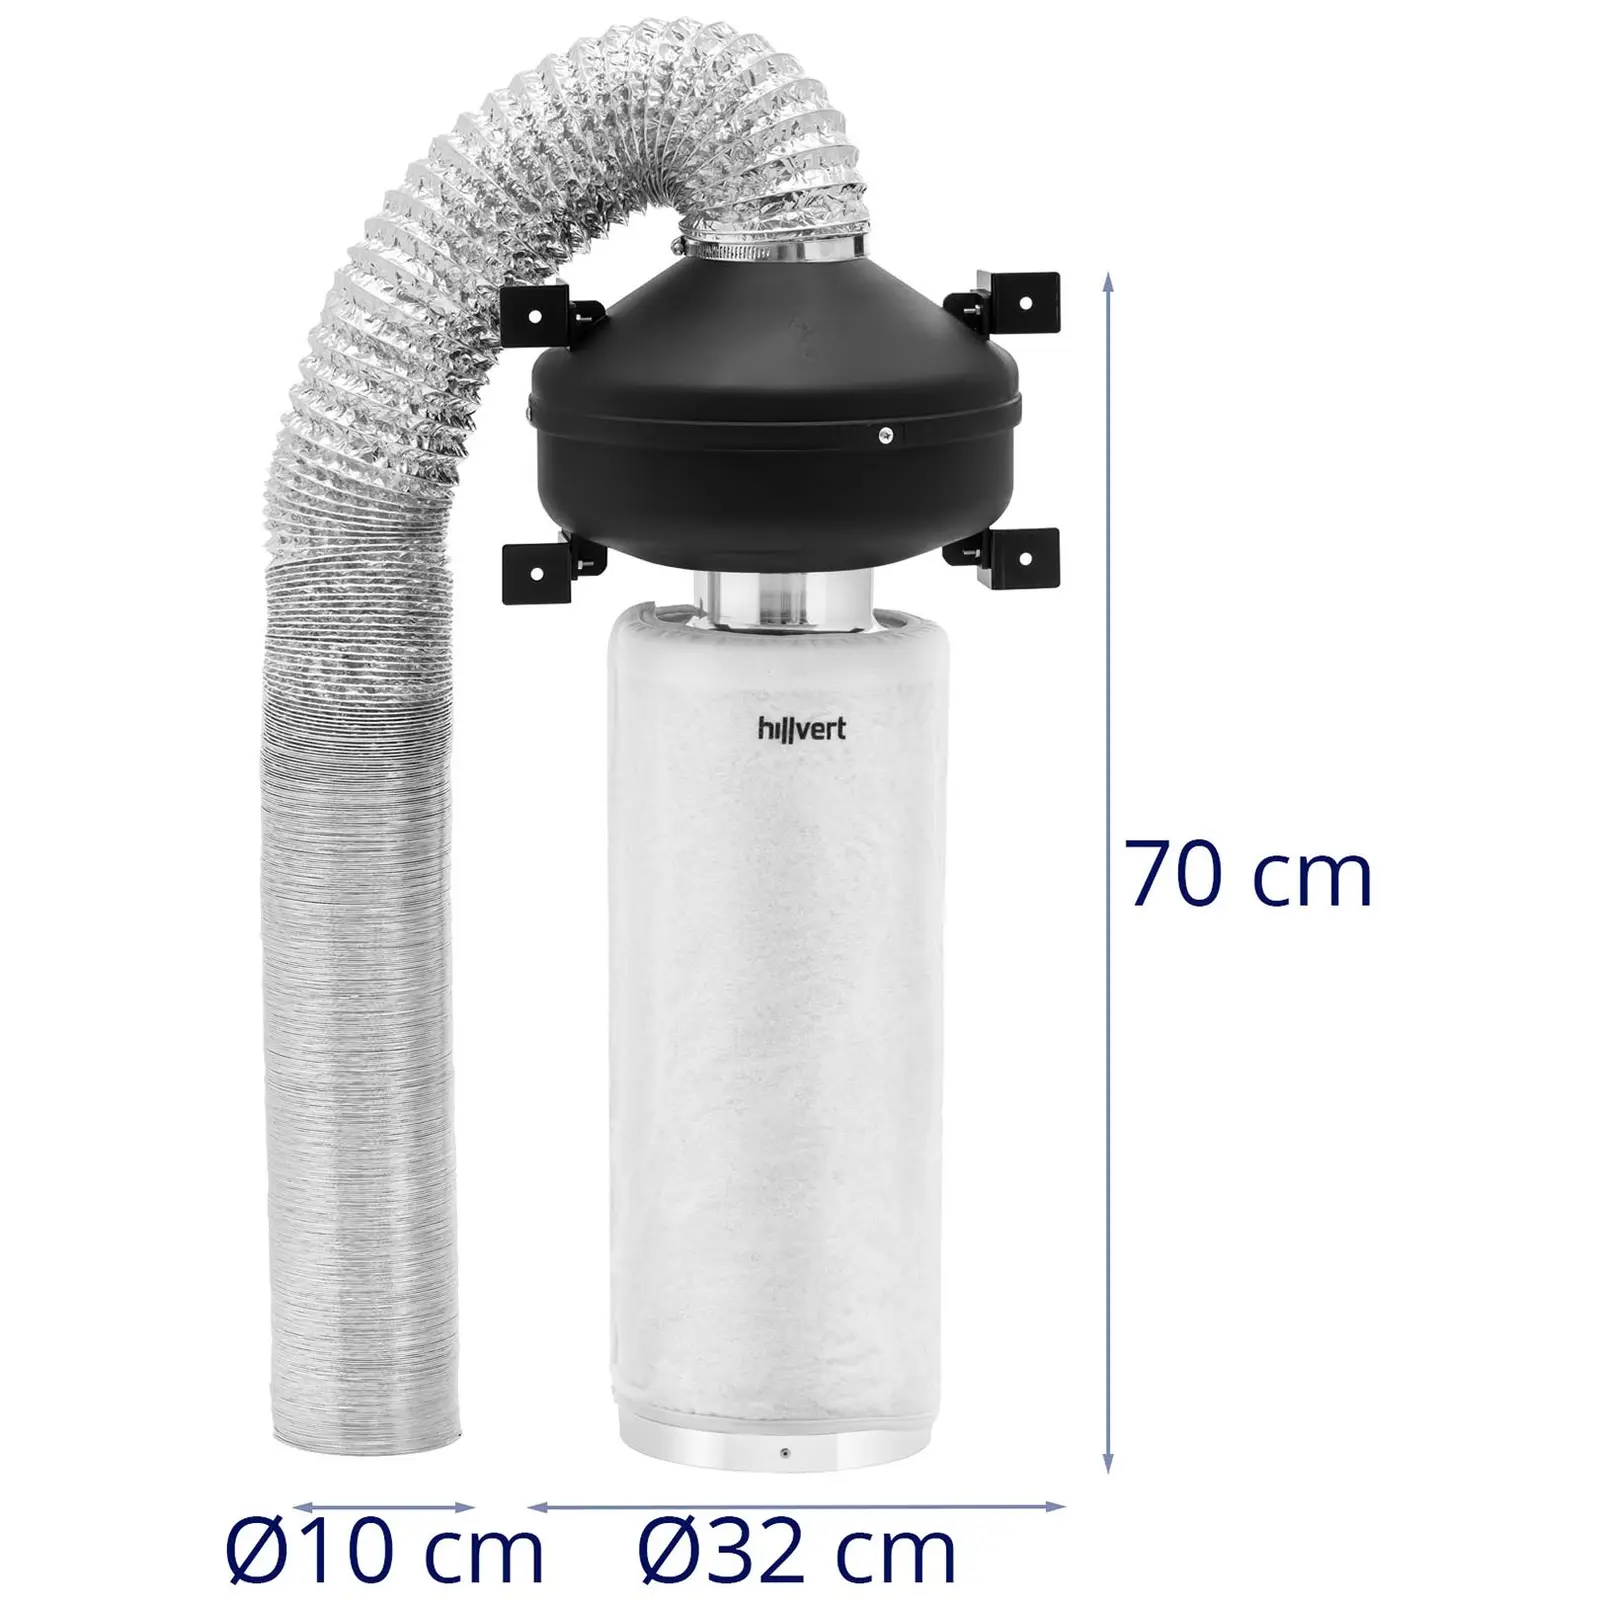 Air Filter Set - 50 cm activated carbon filter / tube fan / exhaust air hose - 249,6 m³/h - Ø 102 mm outlet